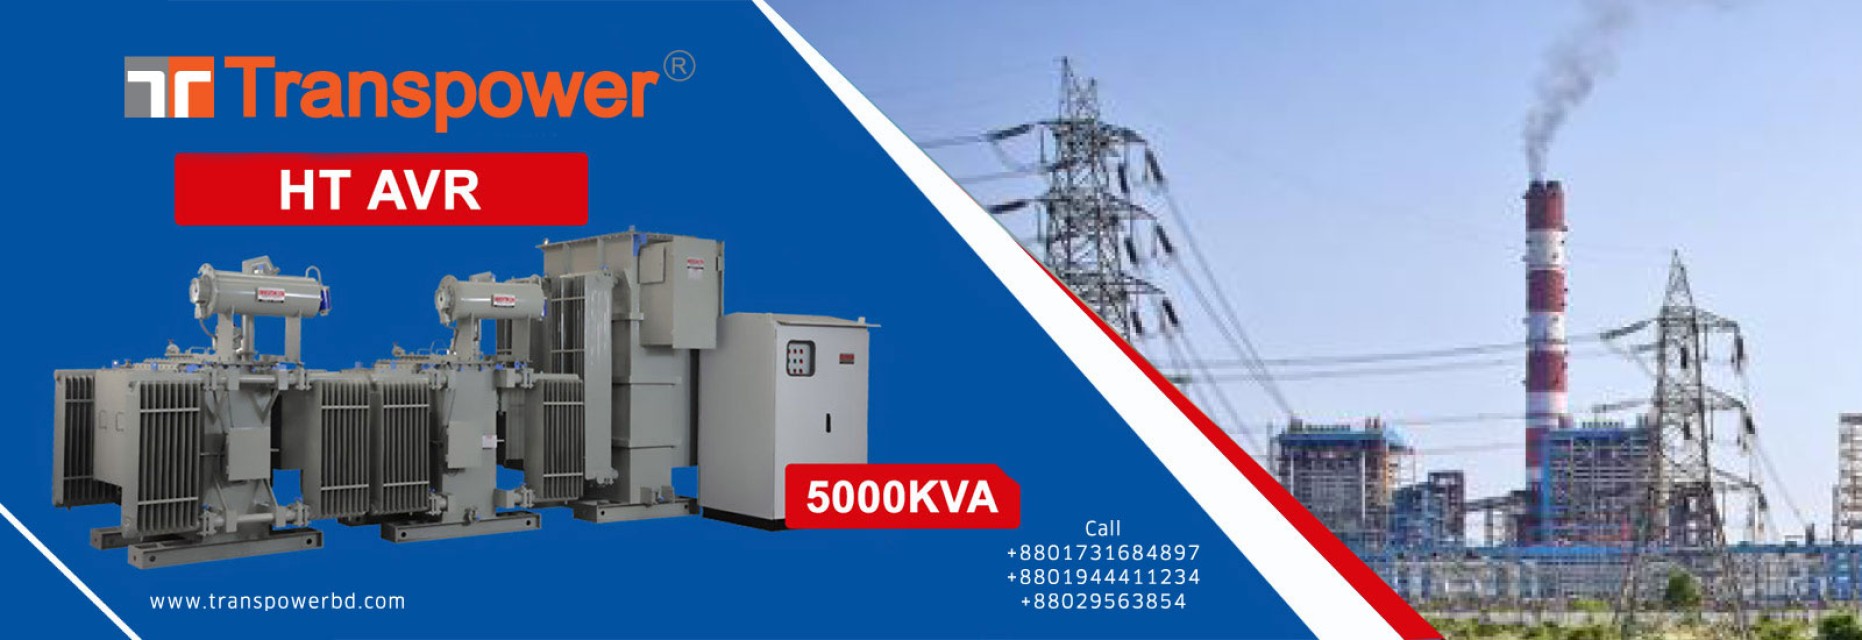 Automatic Voltage Stabilizer - Efficient 3-Phase Controllers